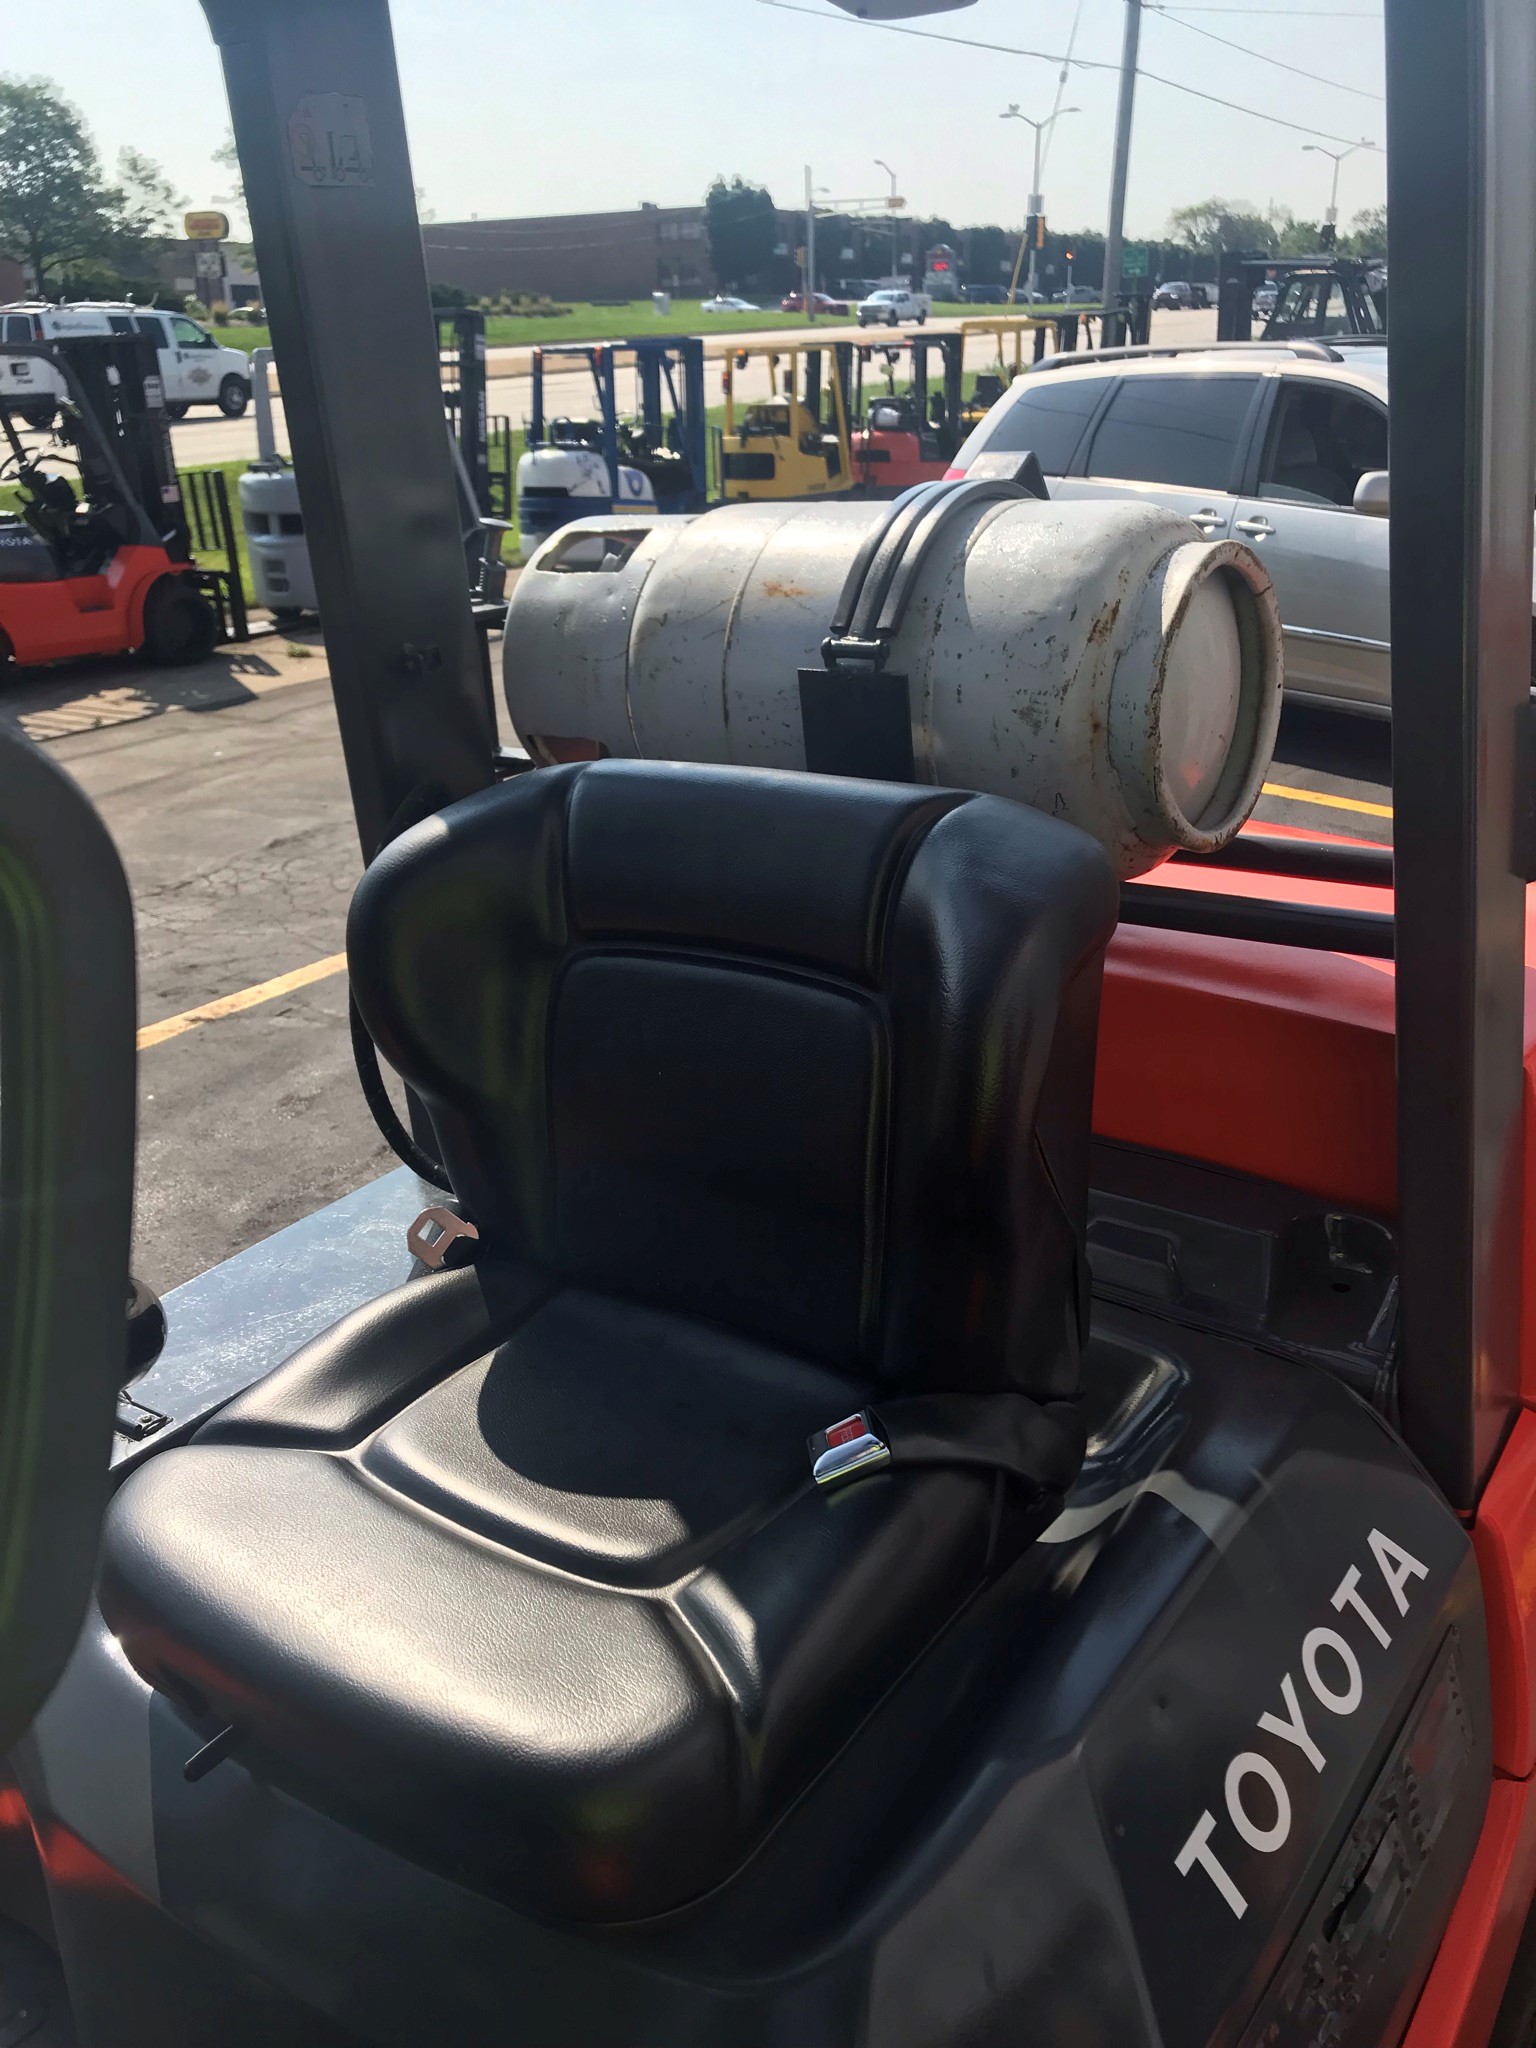 2003 toyota forklift with 3 stage mast for sale